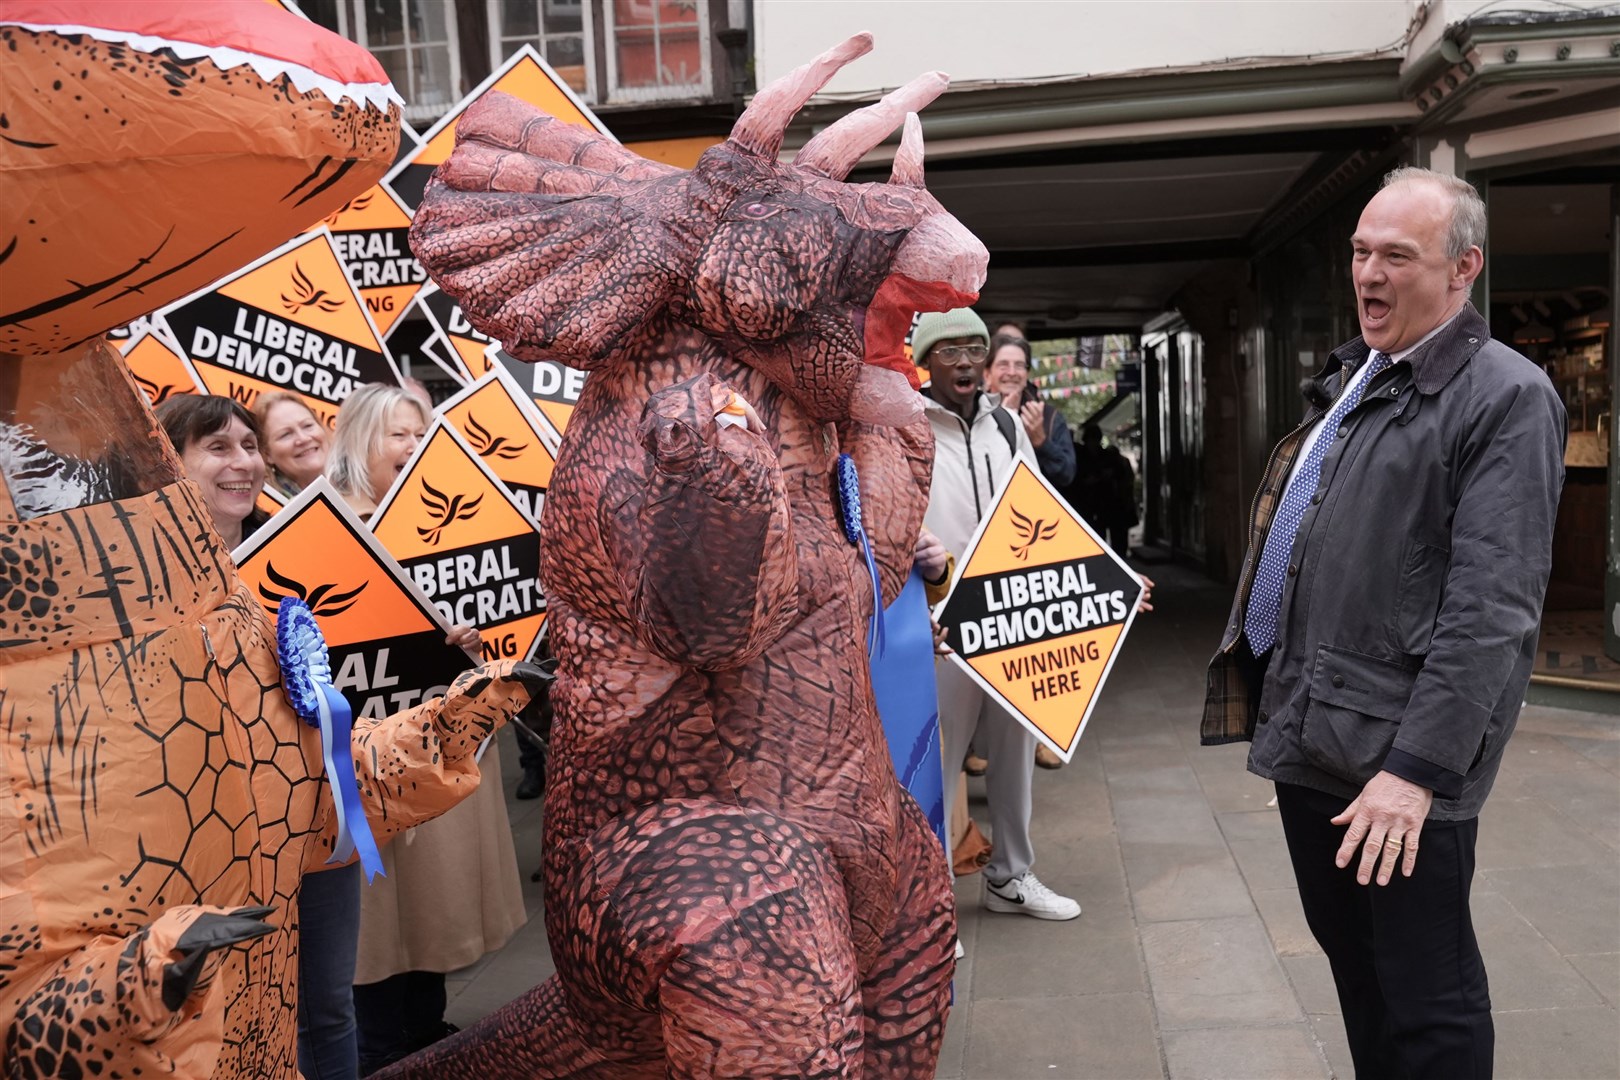 Liberal Democrat leader Sir Ed Davey is greeted by Tory ‘dinosaurs’ as he arrives to join local Lib Dem campaigners at a celebratory rally in Winchester following the local government elections (Stefan Rousseau/PA)